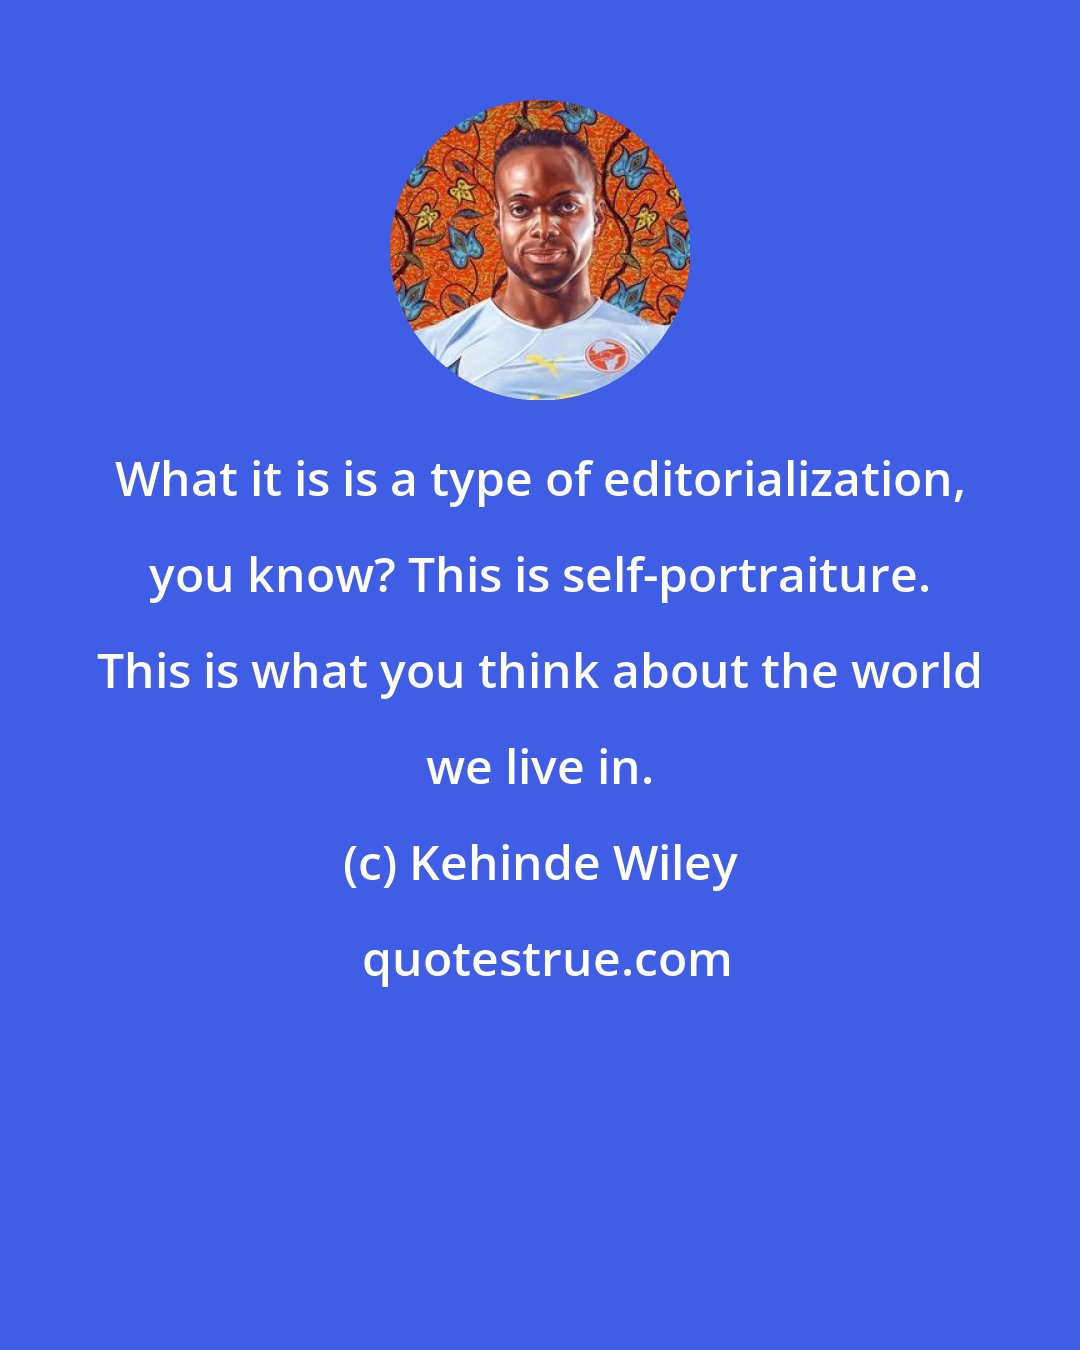 Kehinde Wiley: What it is is a type of editorialization, you know? This is self-portraiture. This is what you think about the world we live in.